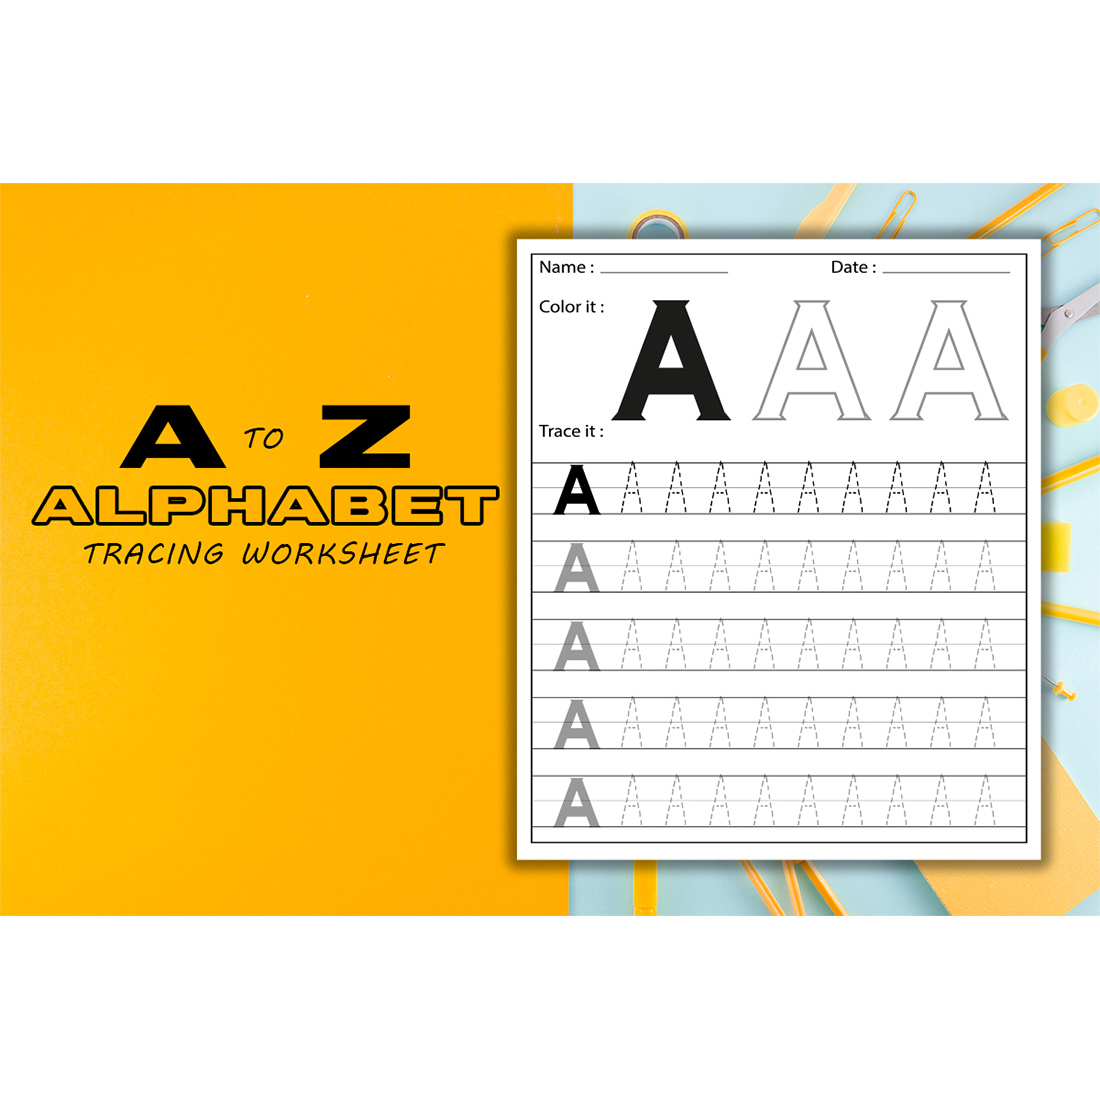 Image of an irresistible sheet for learning the letter A